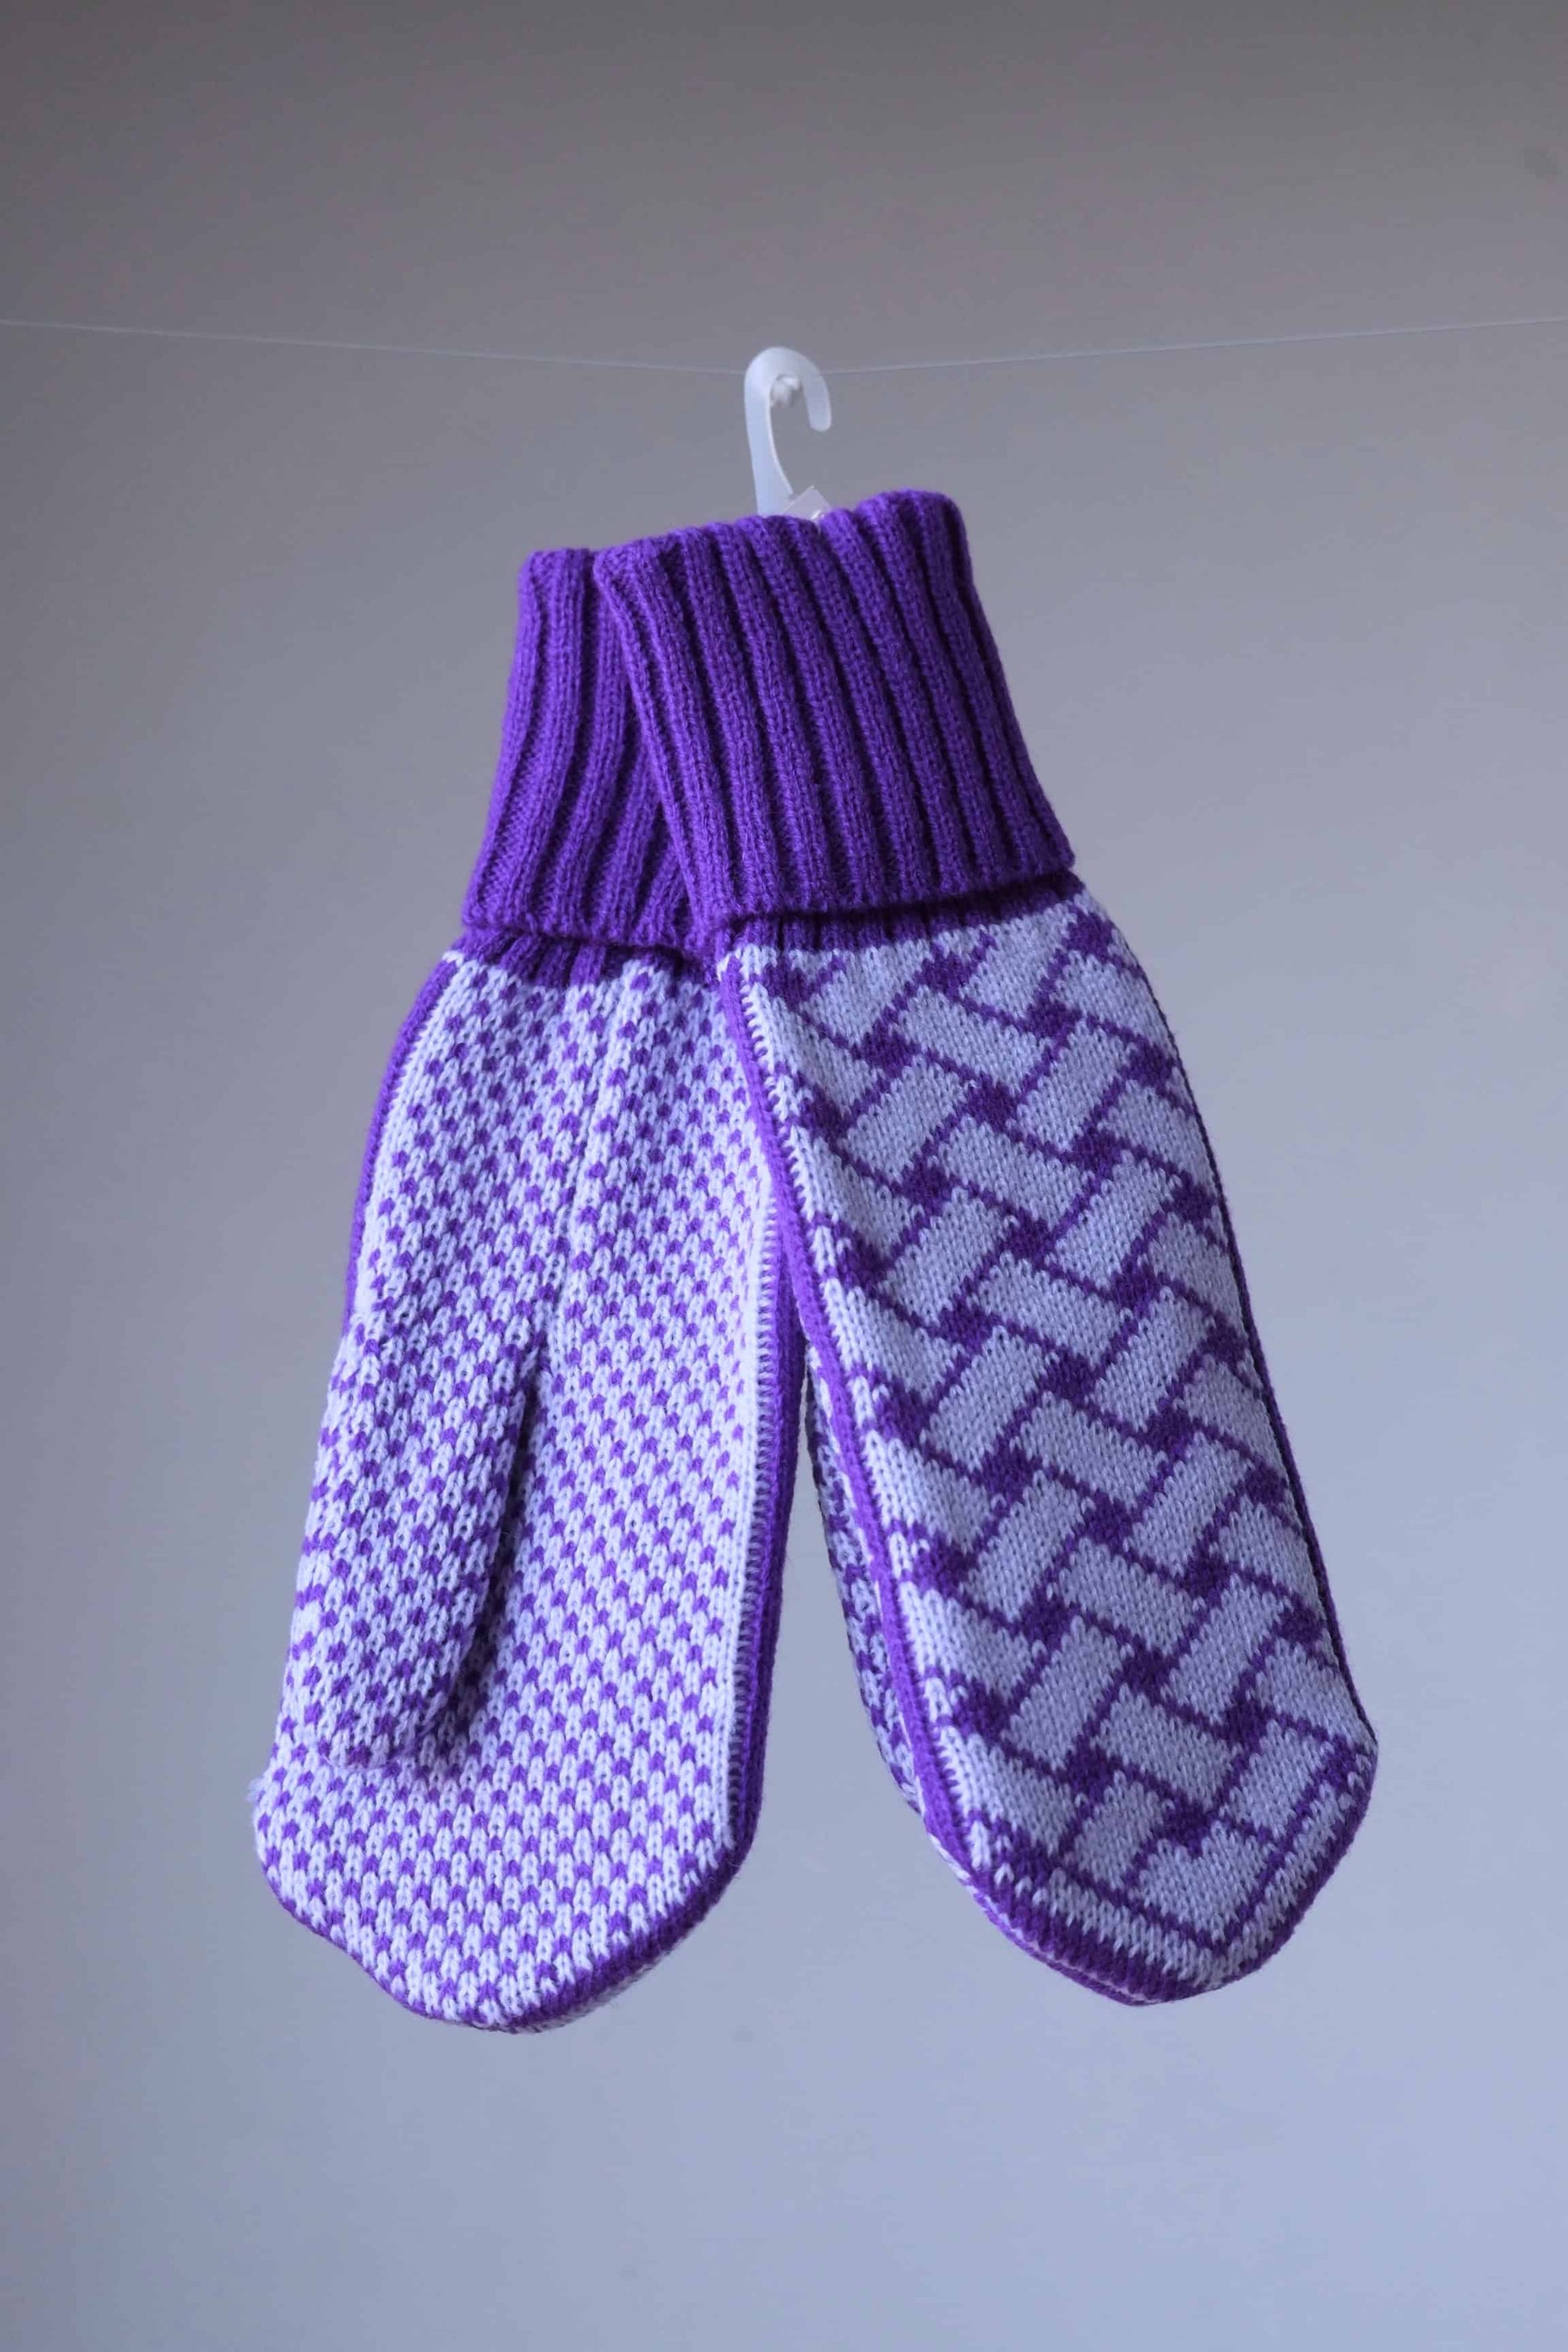 Purple and white wool mittens